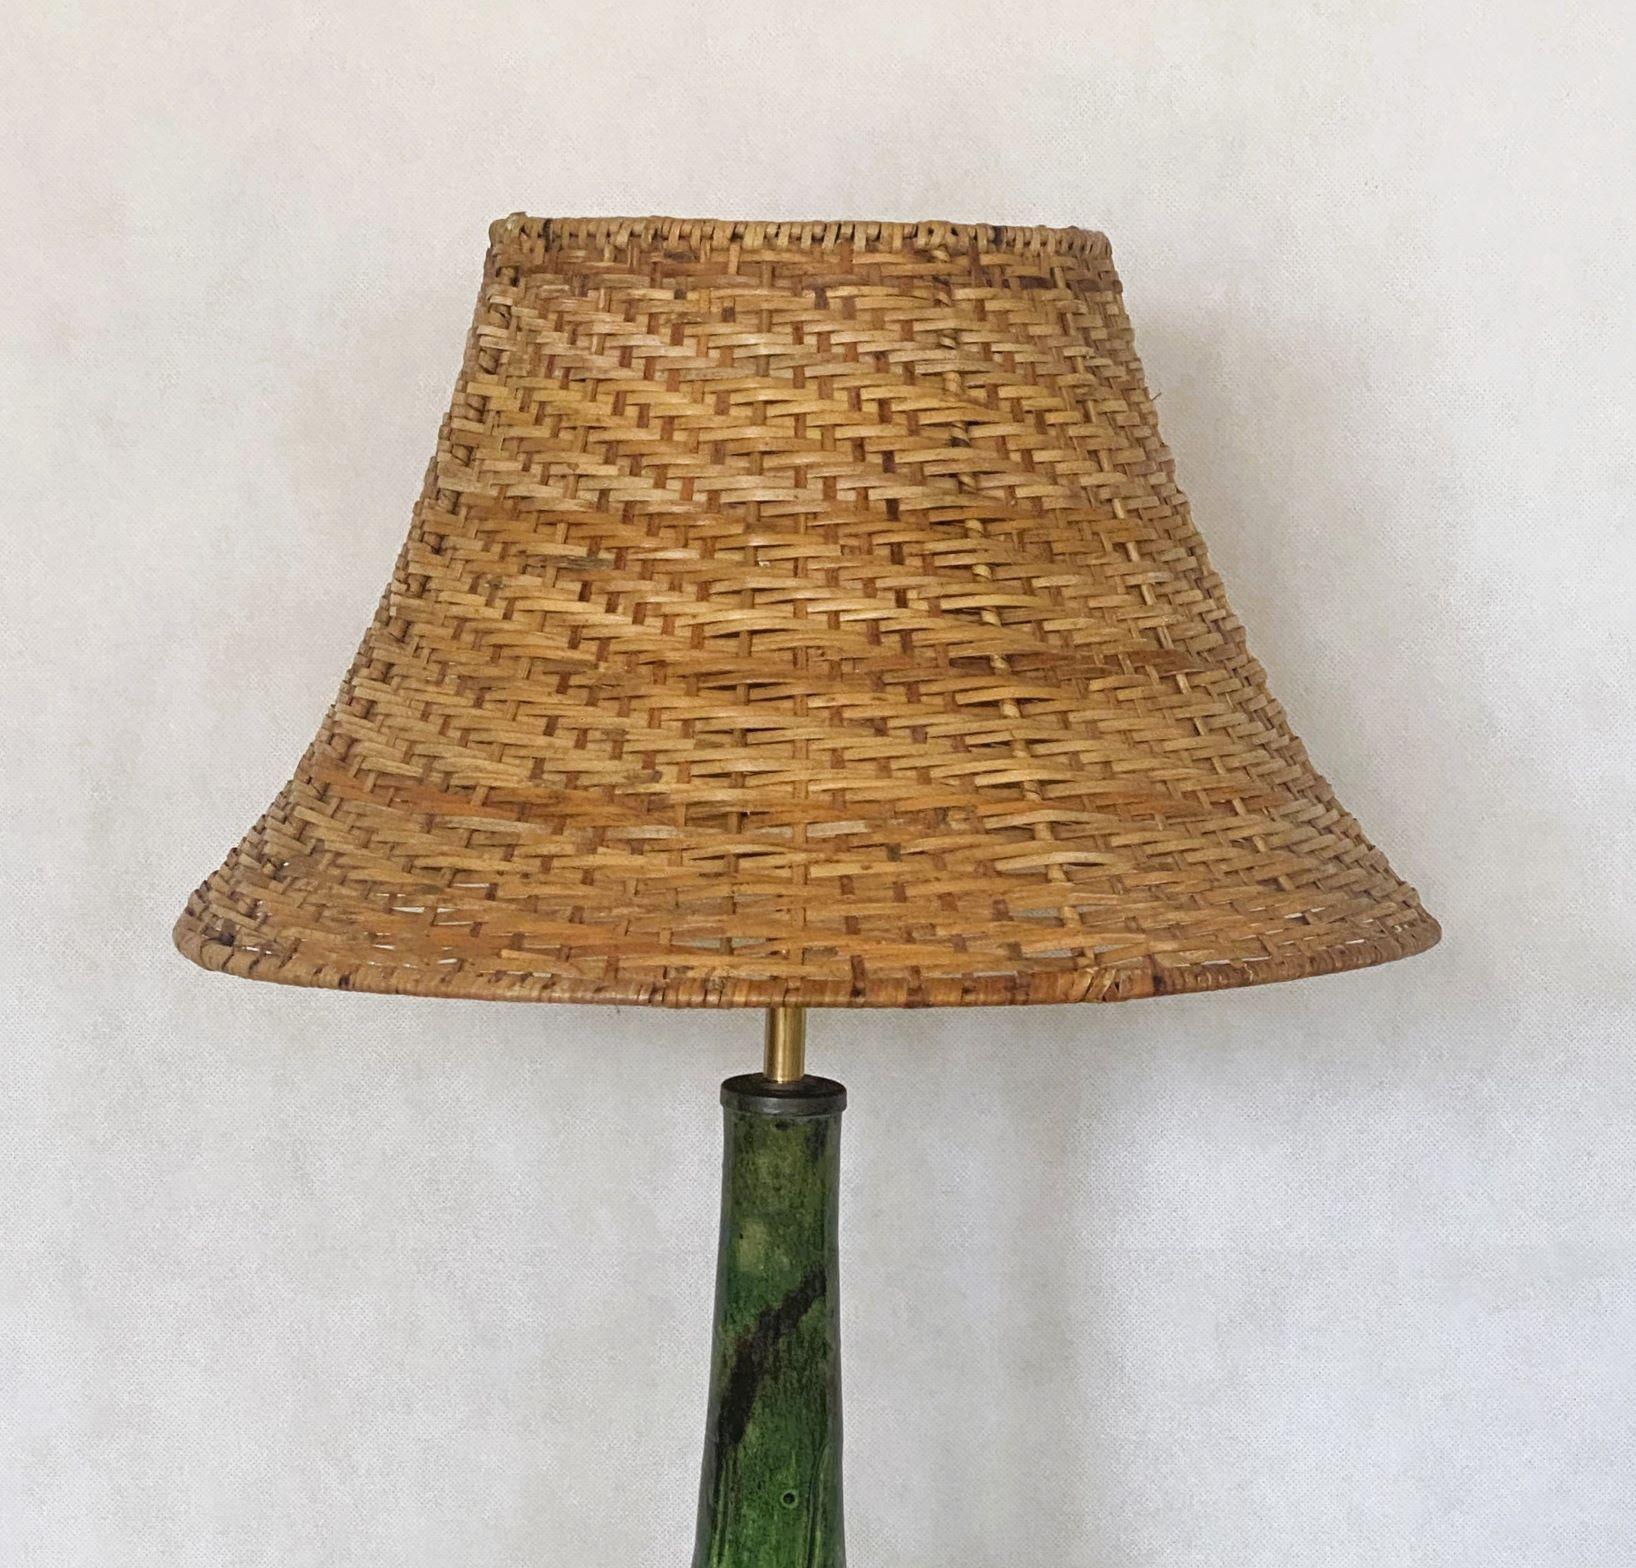 Danish Hand-Painted Glased Ceramic Table Lamp with Wicker Shade, 1960s In Good Condition For Sale In Frankfurt am Main, DE